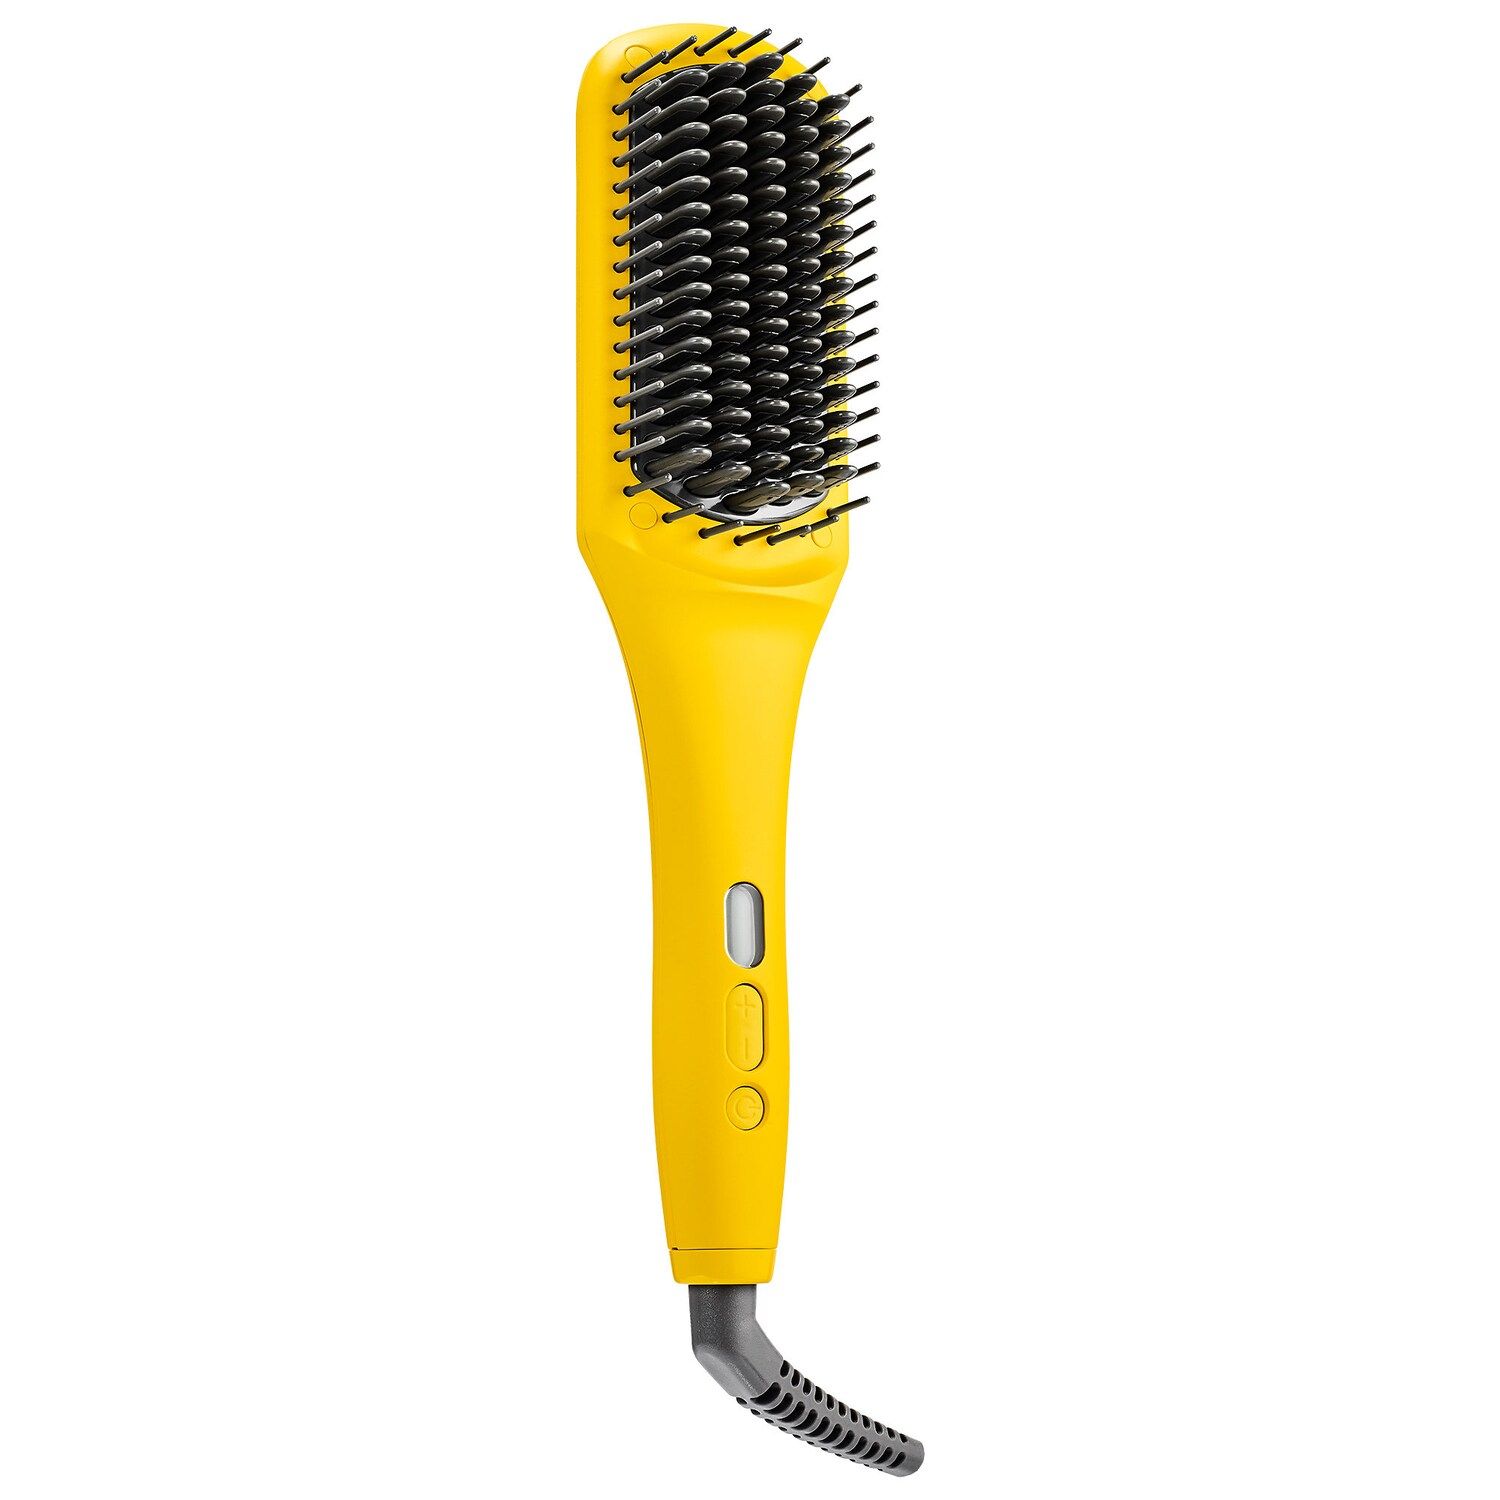 Update more than 152 hair strainer comb latest